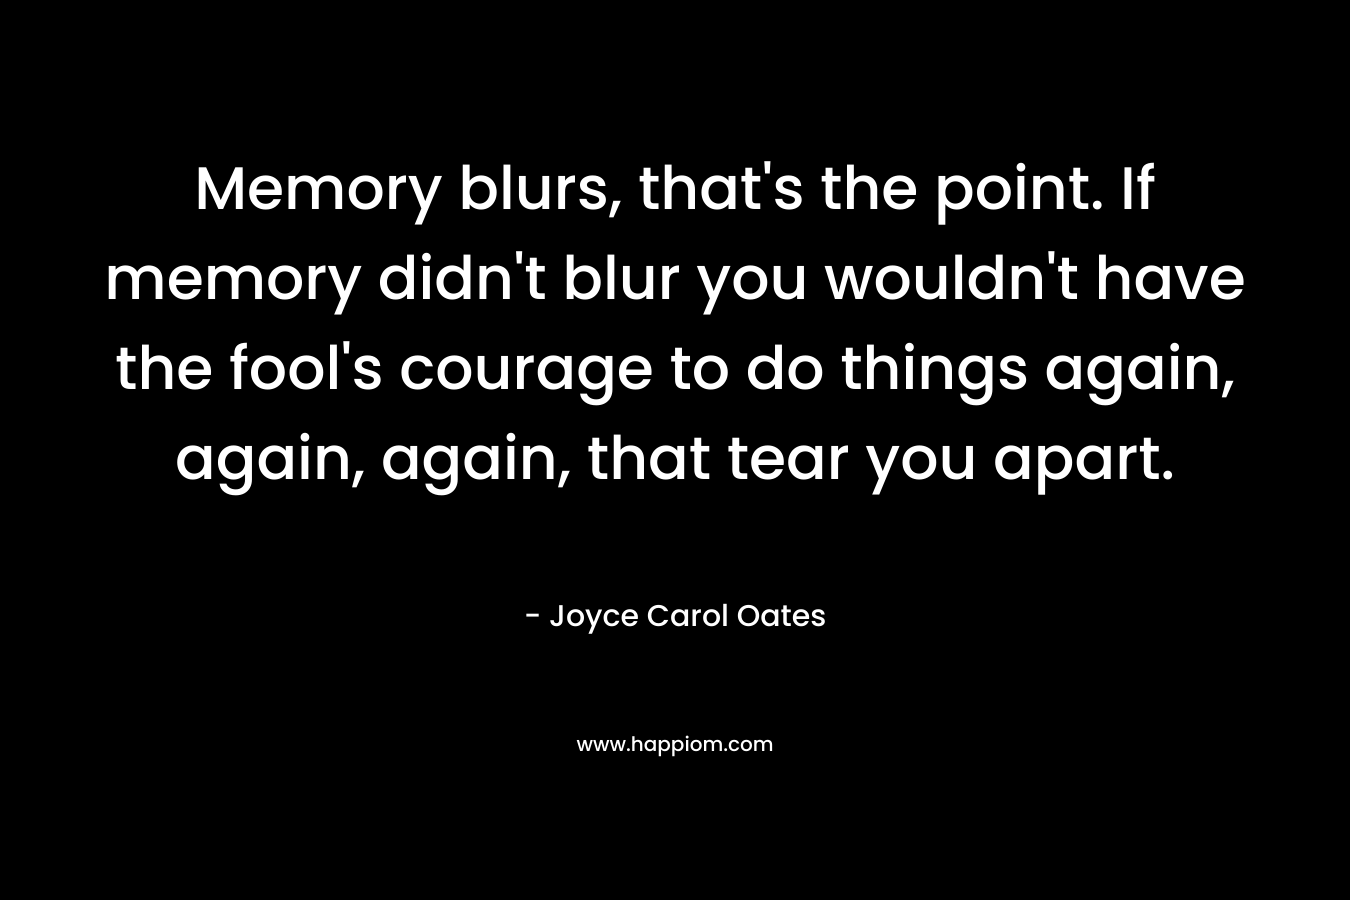 Memory blurs, that’s the point. If memory didn’t blur you wouldn’t have the fool’s courage to do things again, again, again, that tear you apart. – Joyce Carol Oates